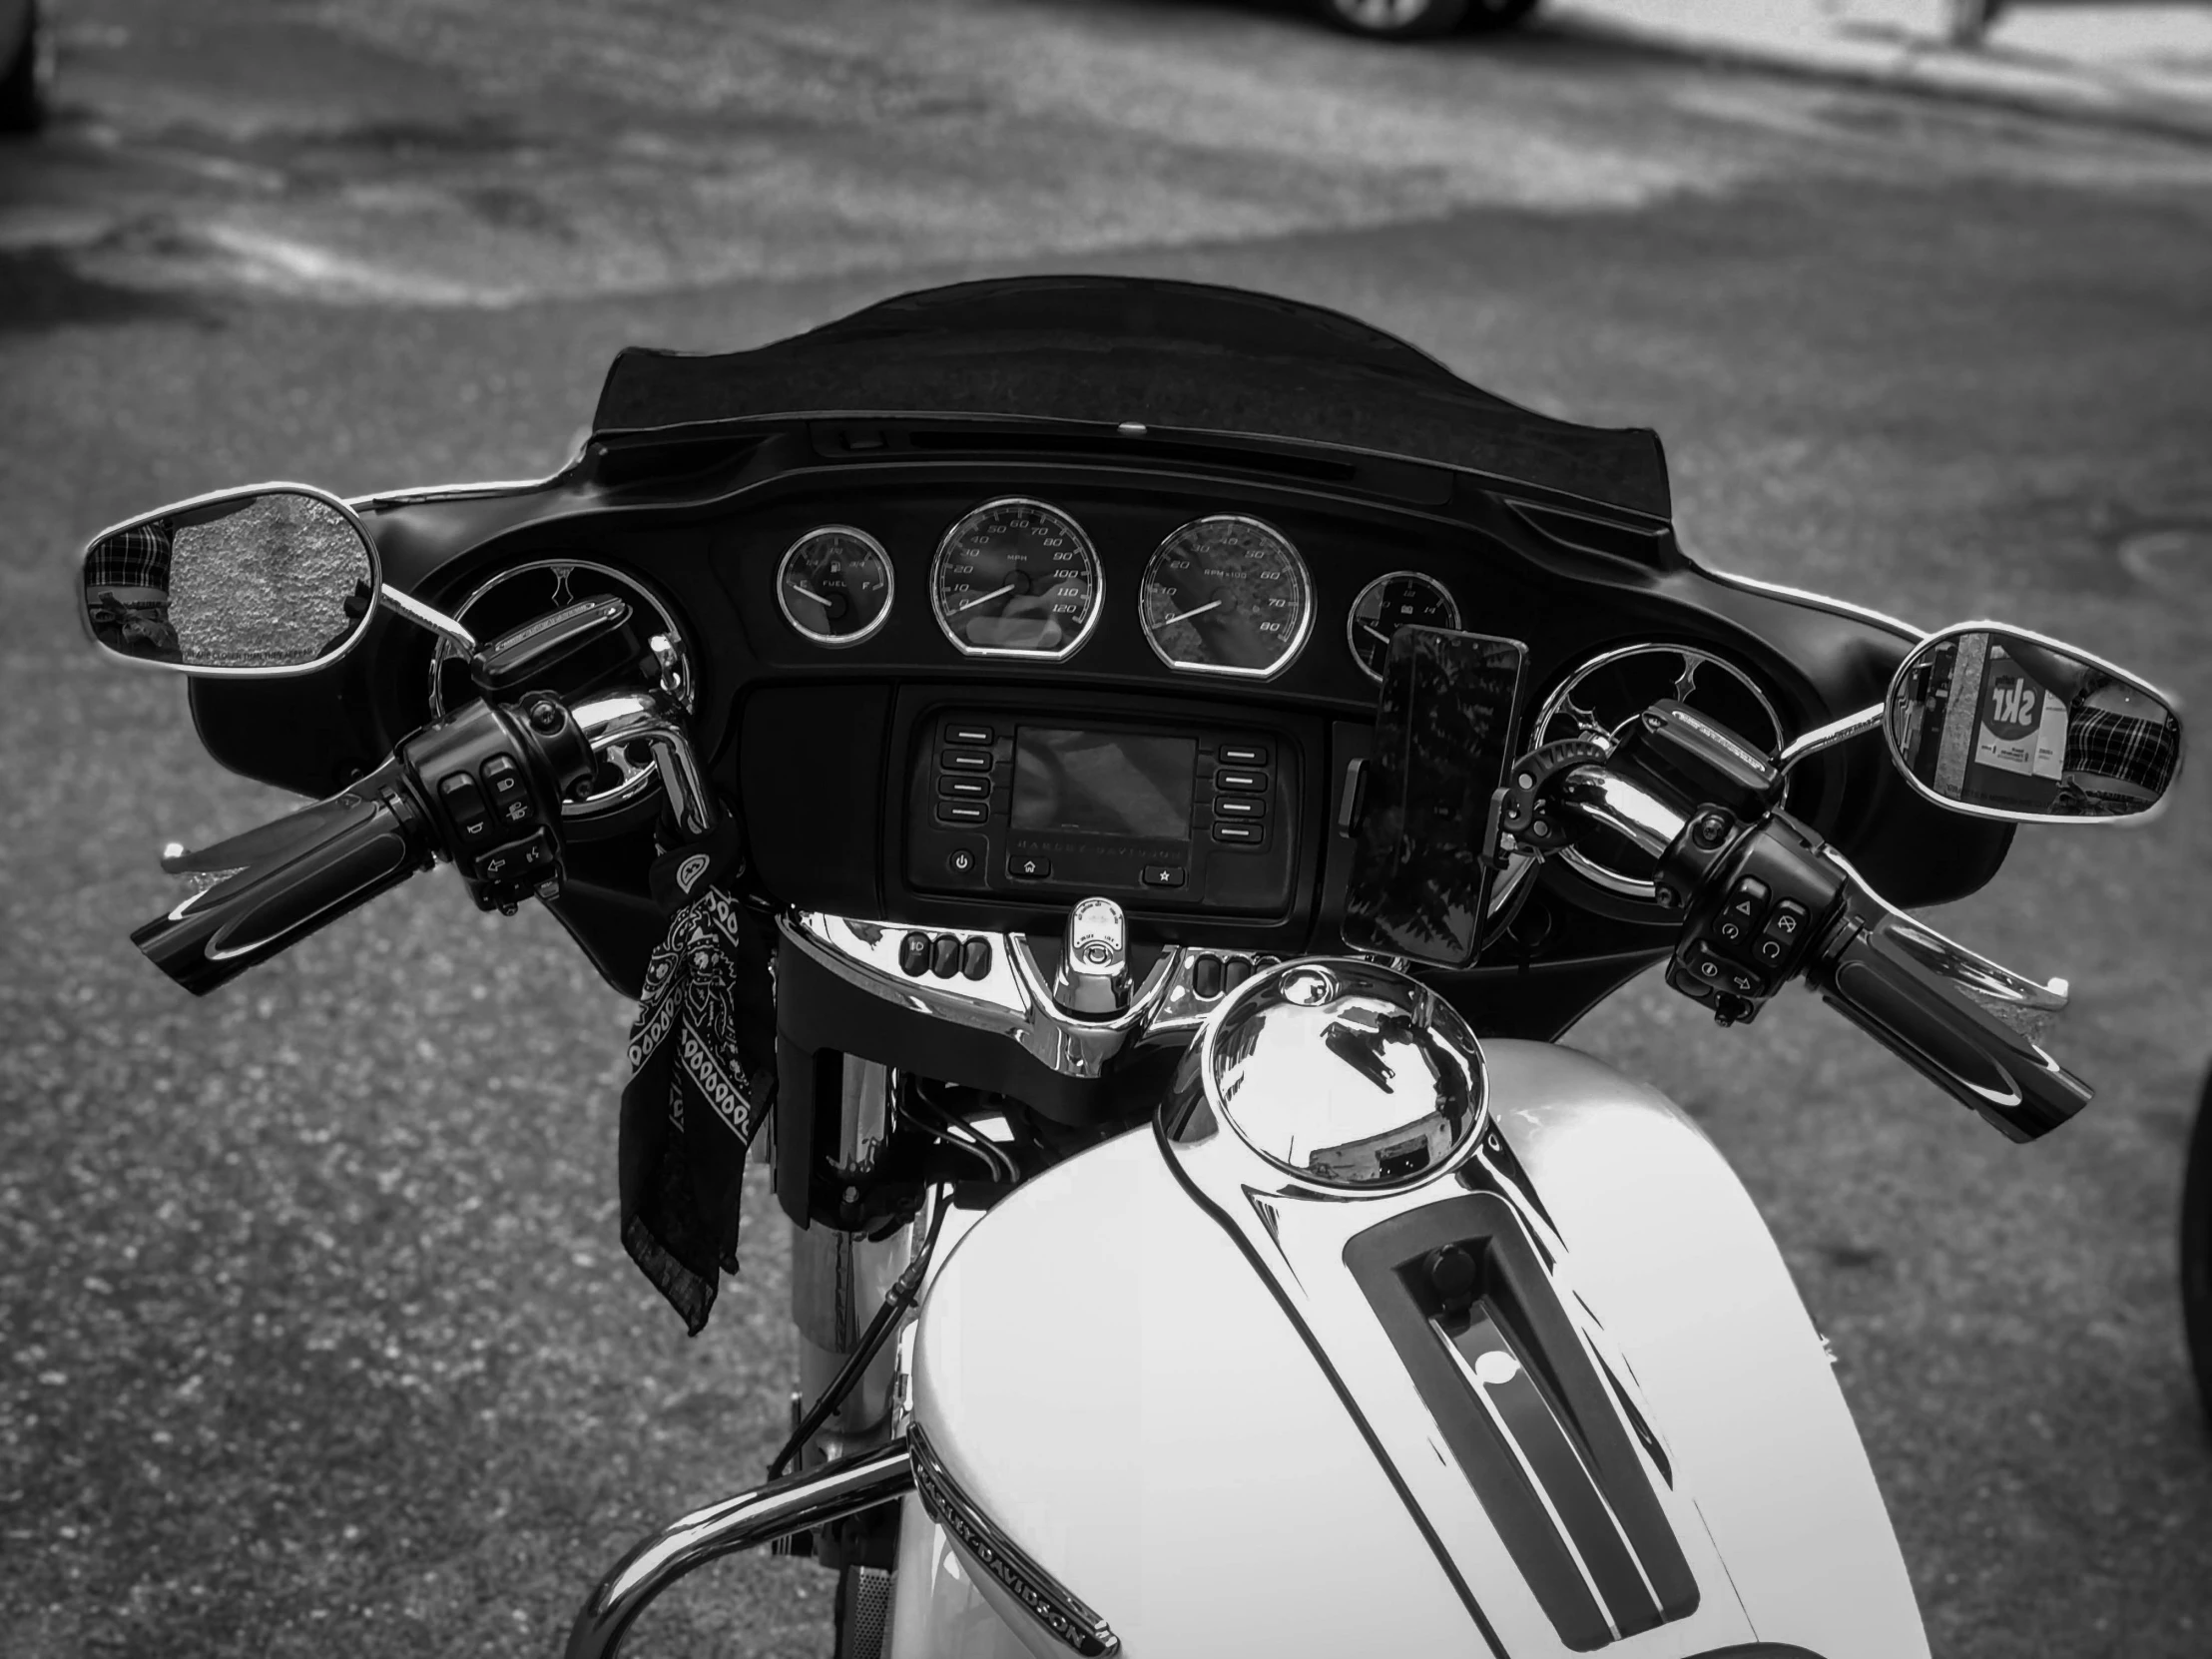 this motorcycle has a dash light, tachometer, and other instrument controls